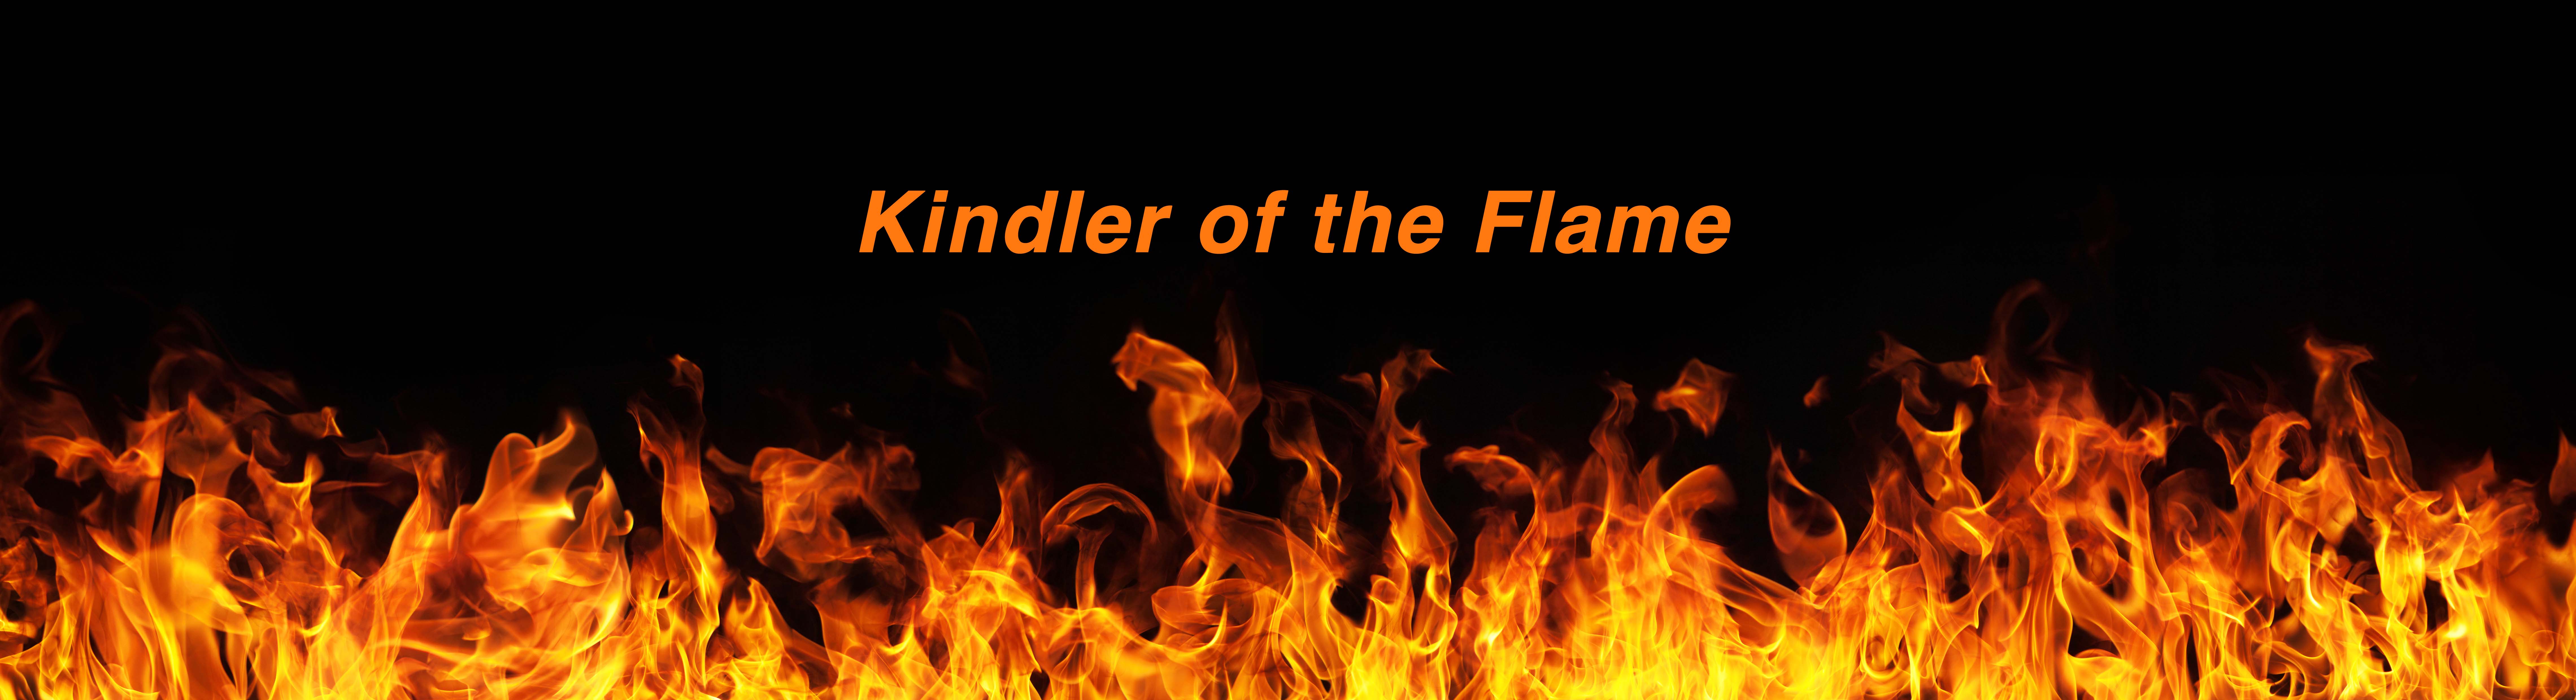 Kindler of the Flame